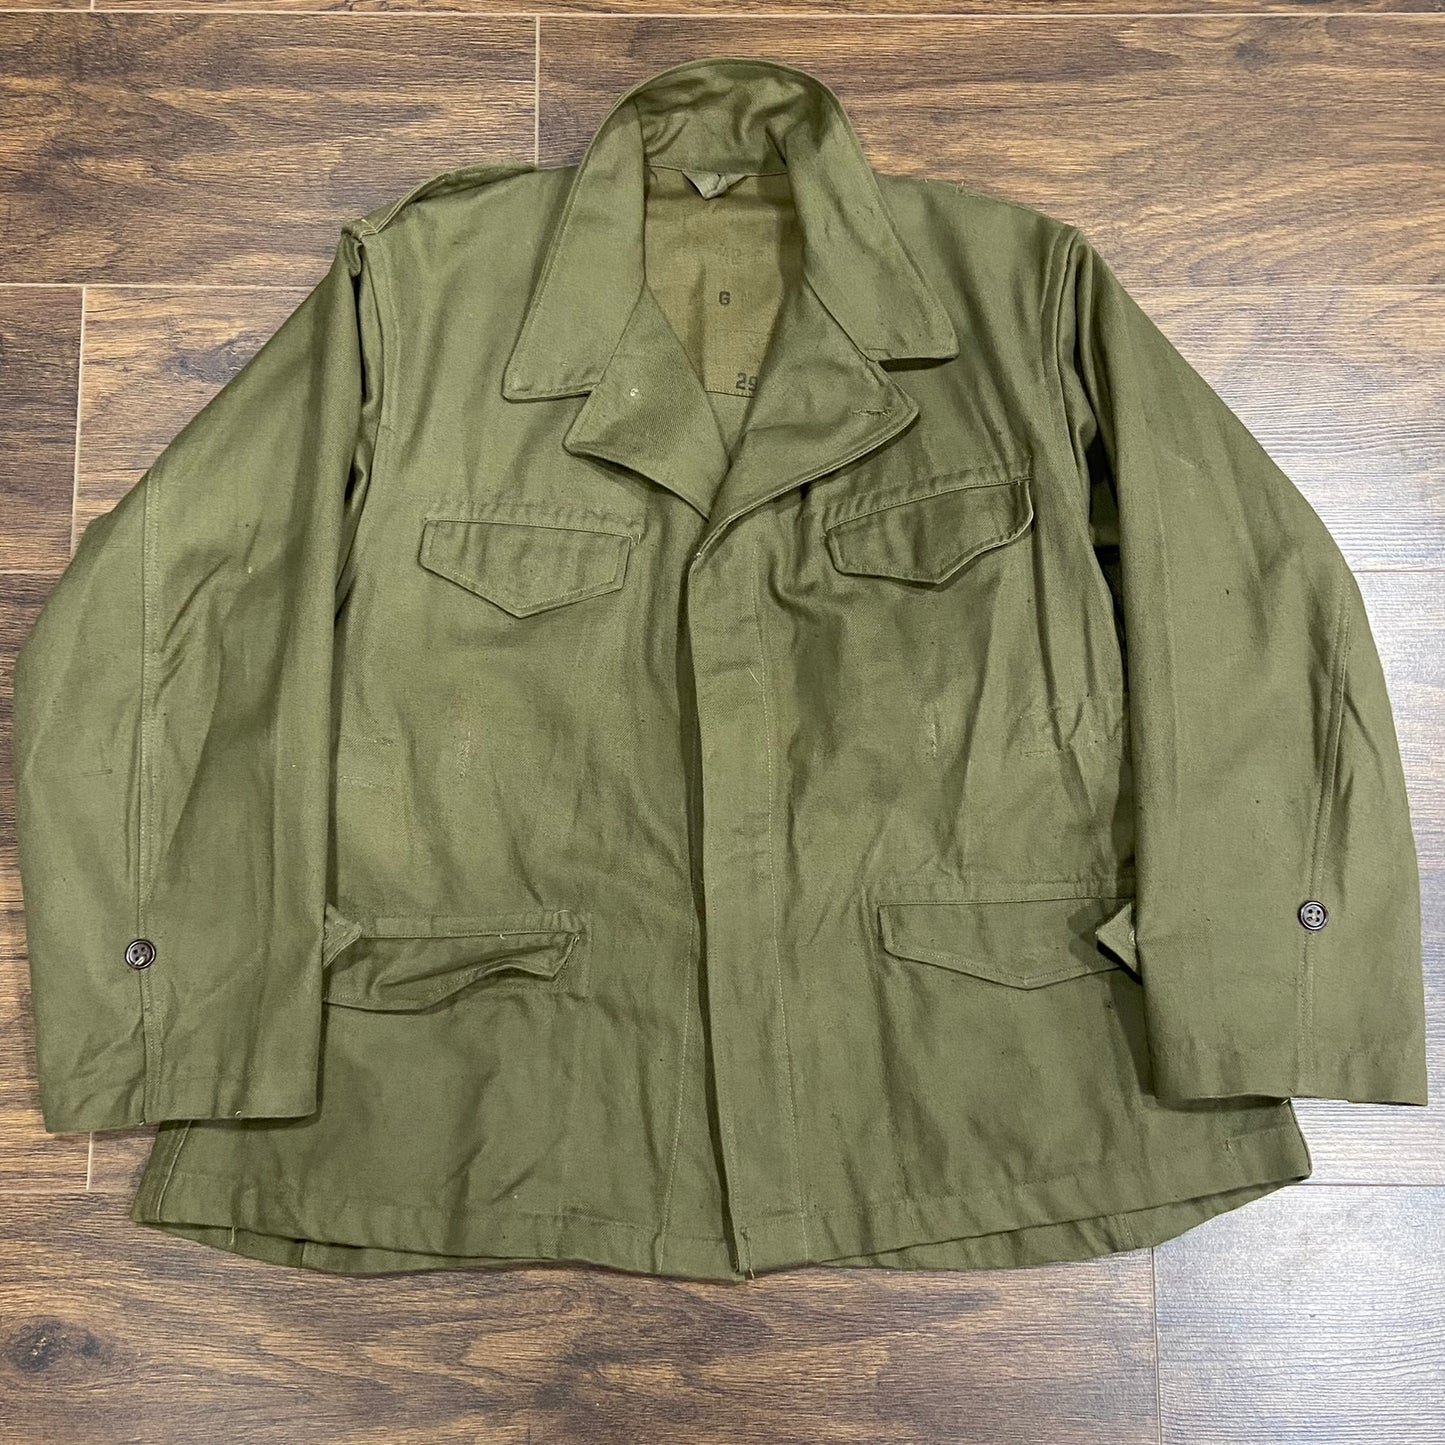 Deadstock 1952 dated French Army M47 jacket, size large